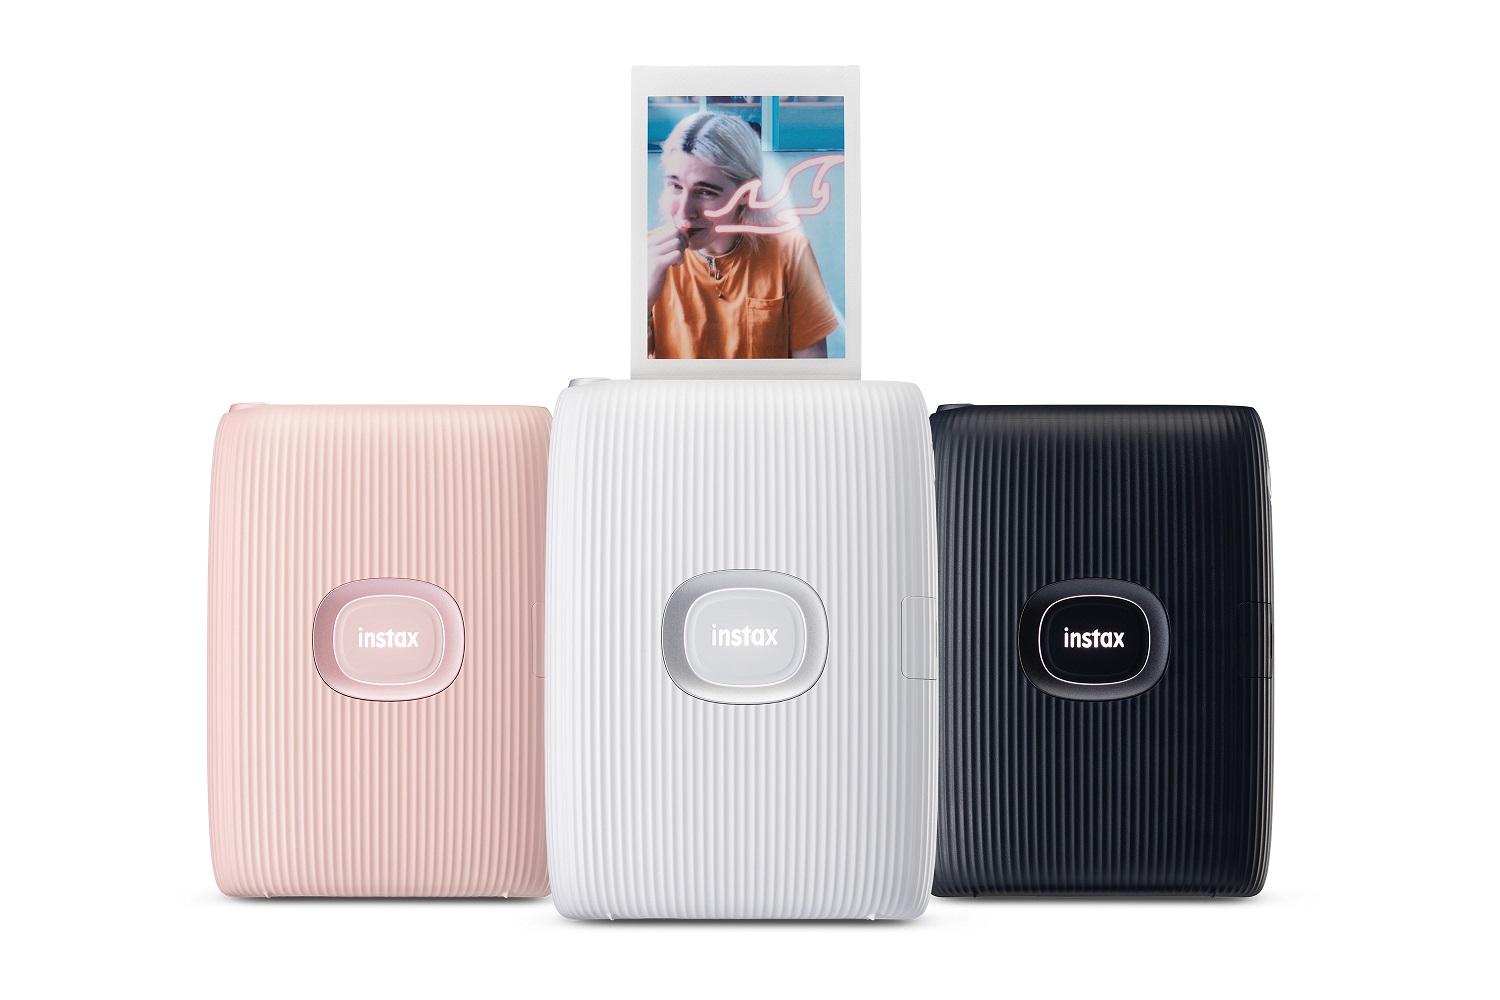 Instax mini Link 2 portable smartphone printer heading to South Africa